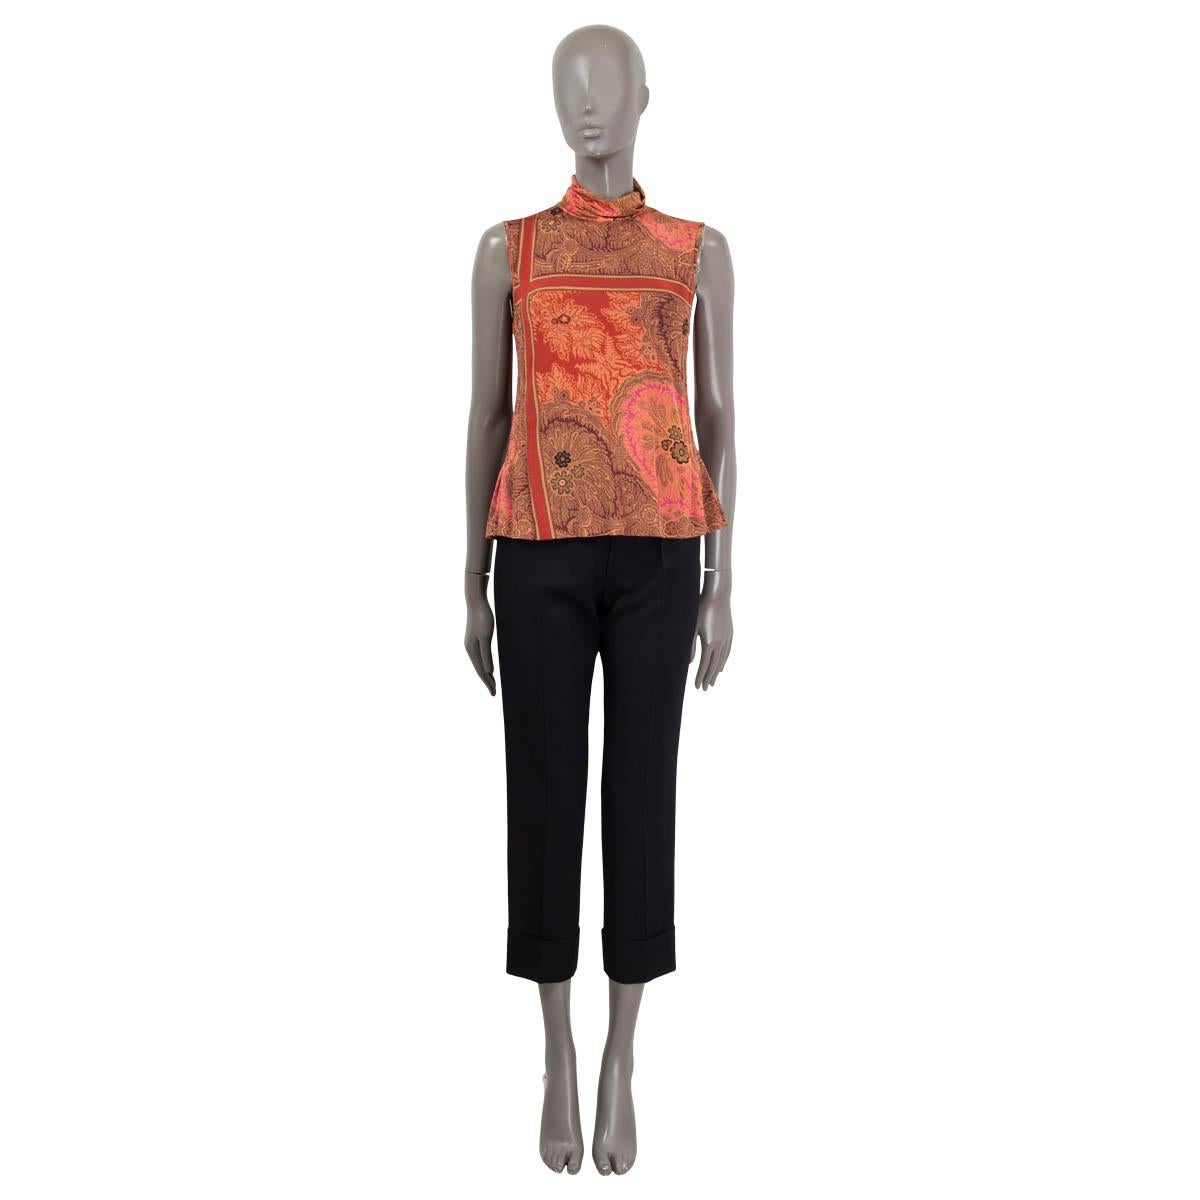 100% authentic Etro sleeveless turtleneck top in nylon (90%) and elastane (10%) with paisley-print in roat, olive, pink and brown. Has been worn and is in excellent condition.

Measurements
Tag Size	44
Size	L
Shoulder Width	35cm (13.7in)
Bust